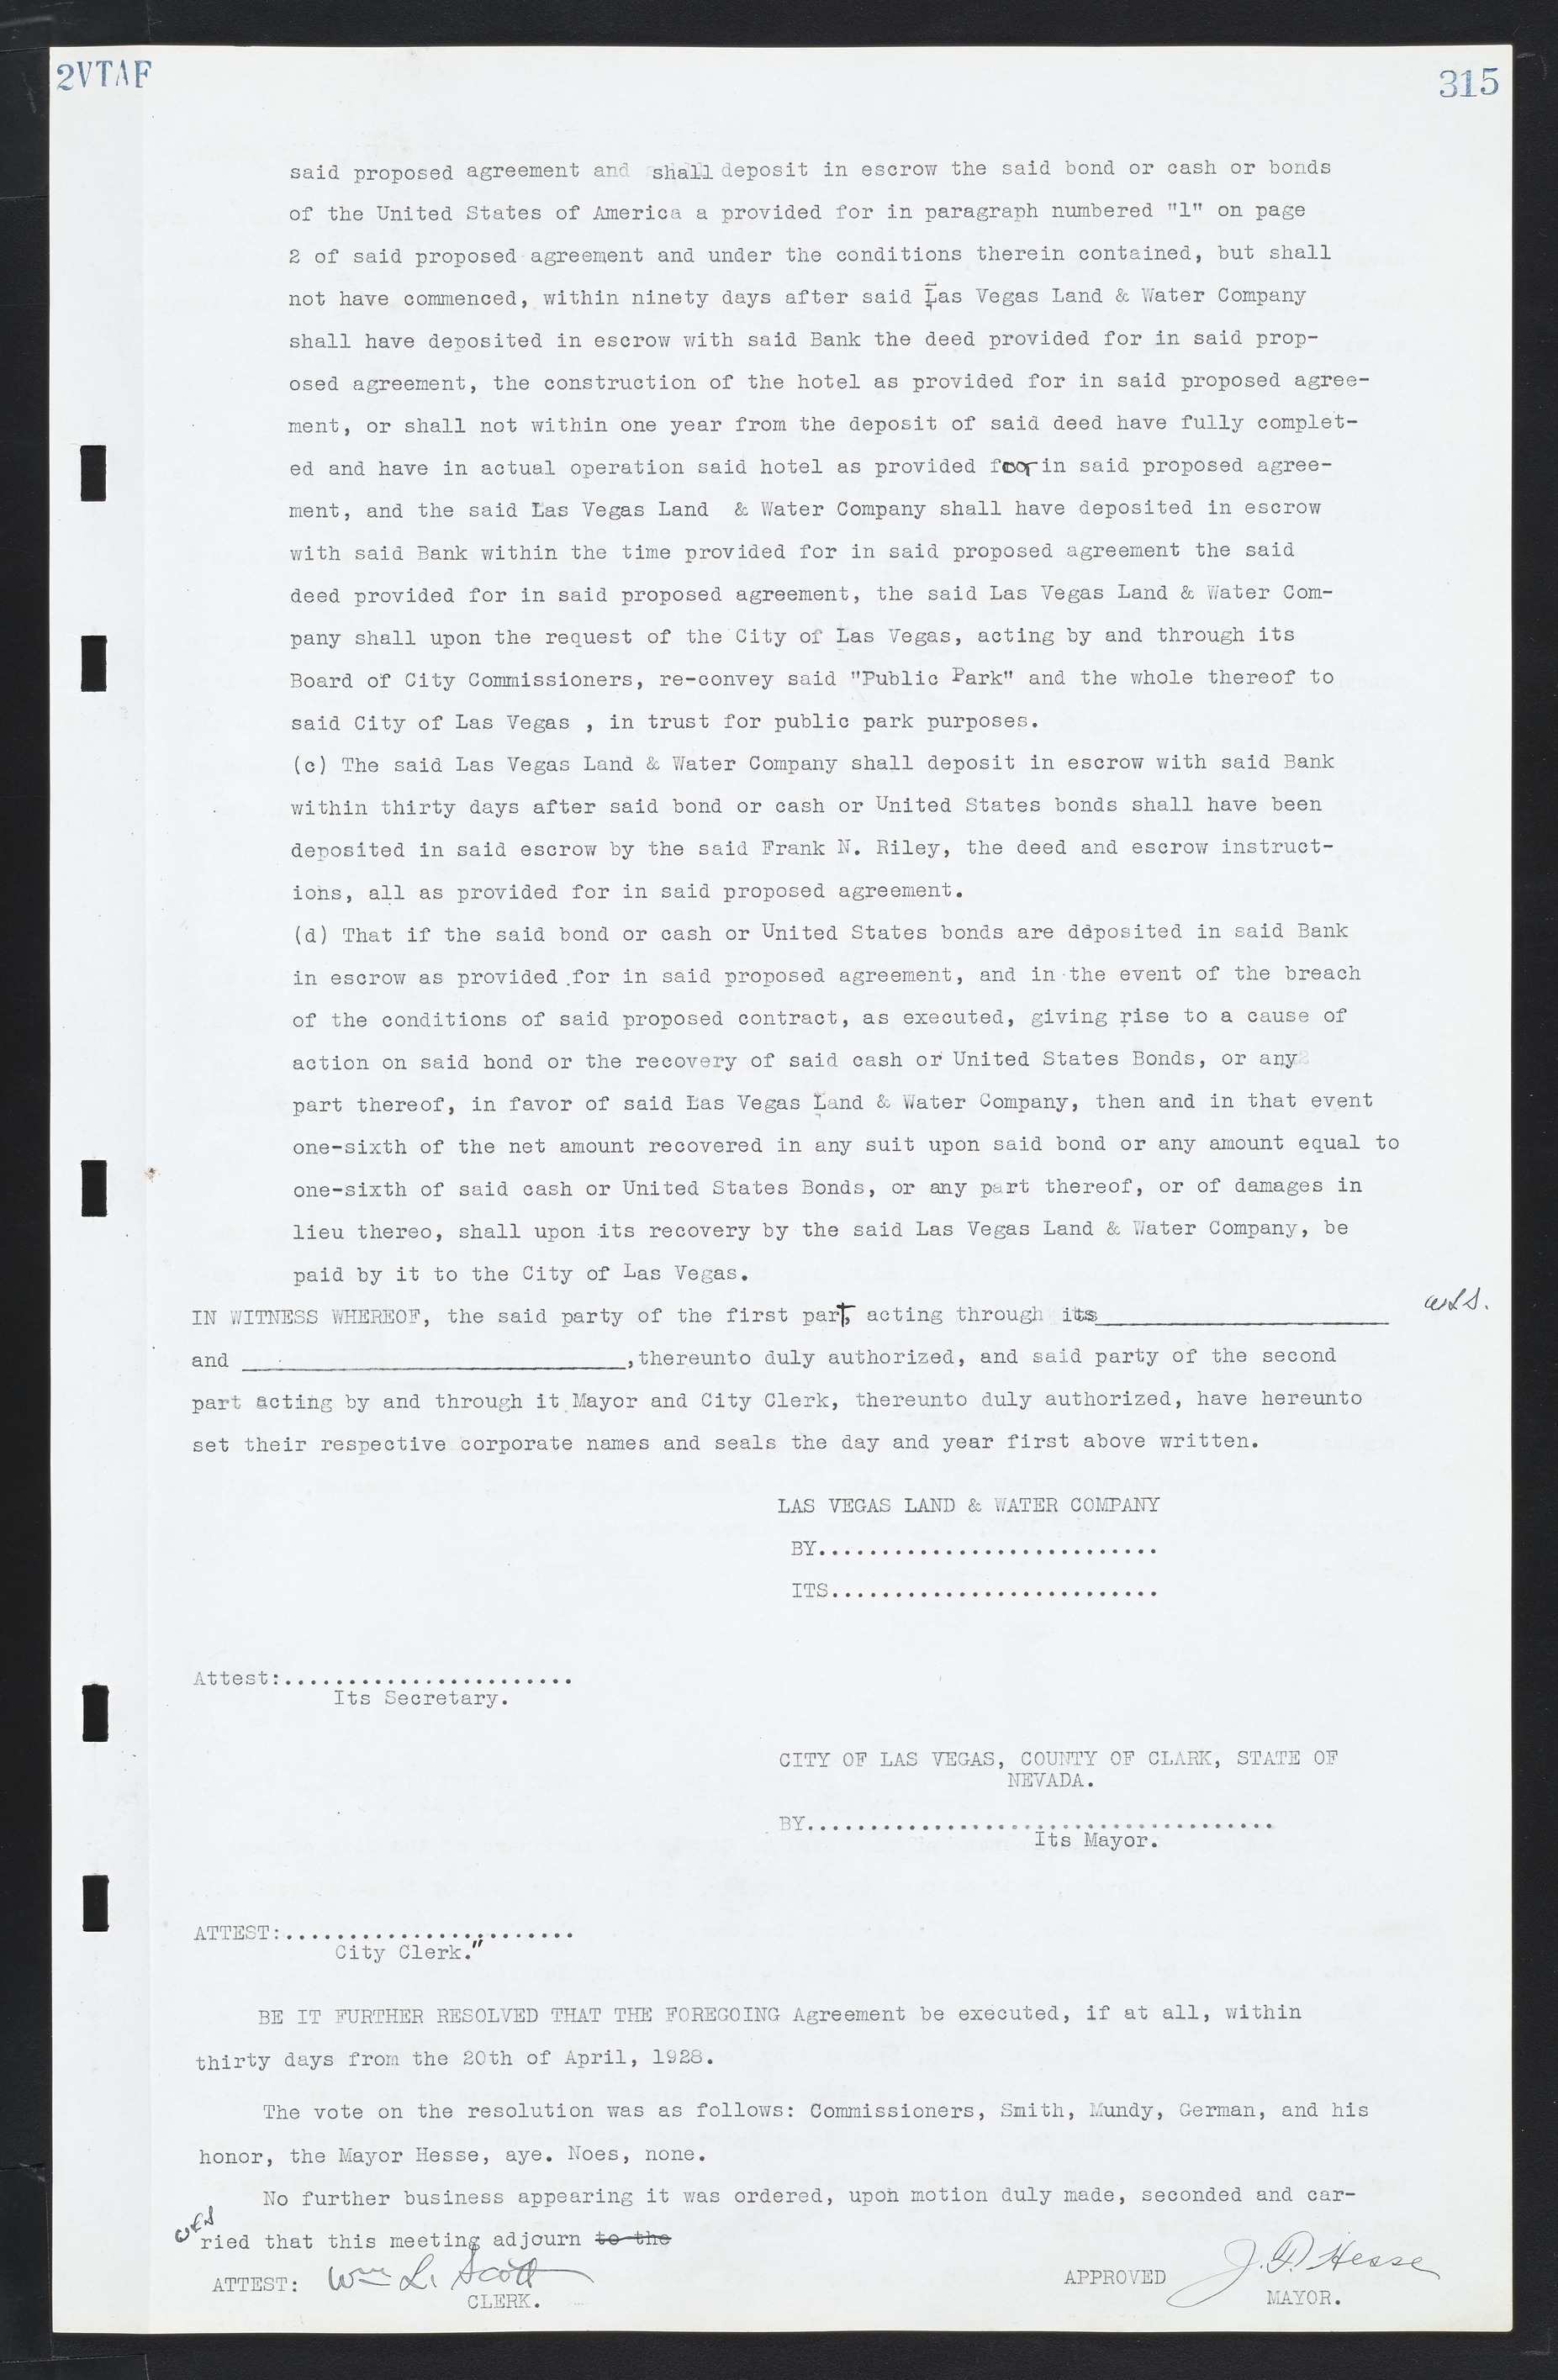 Las Vegas City Commission Minutes, March 1, 1922 to May 10, 1929, lvc000002-324